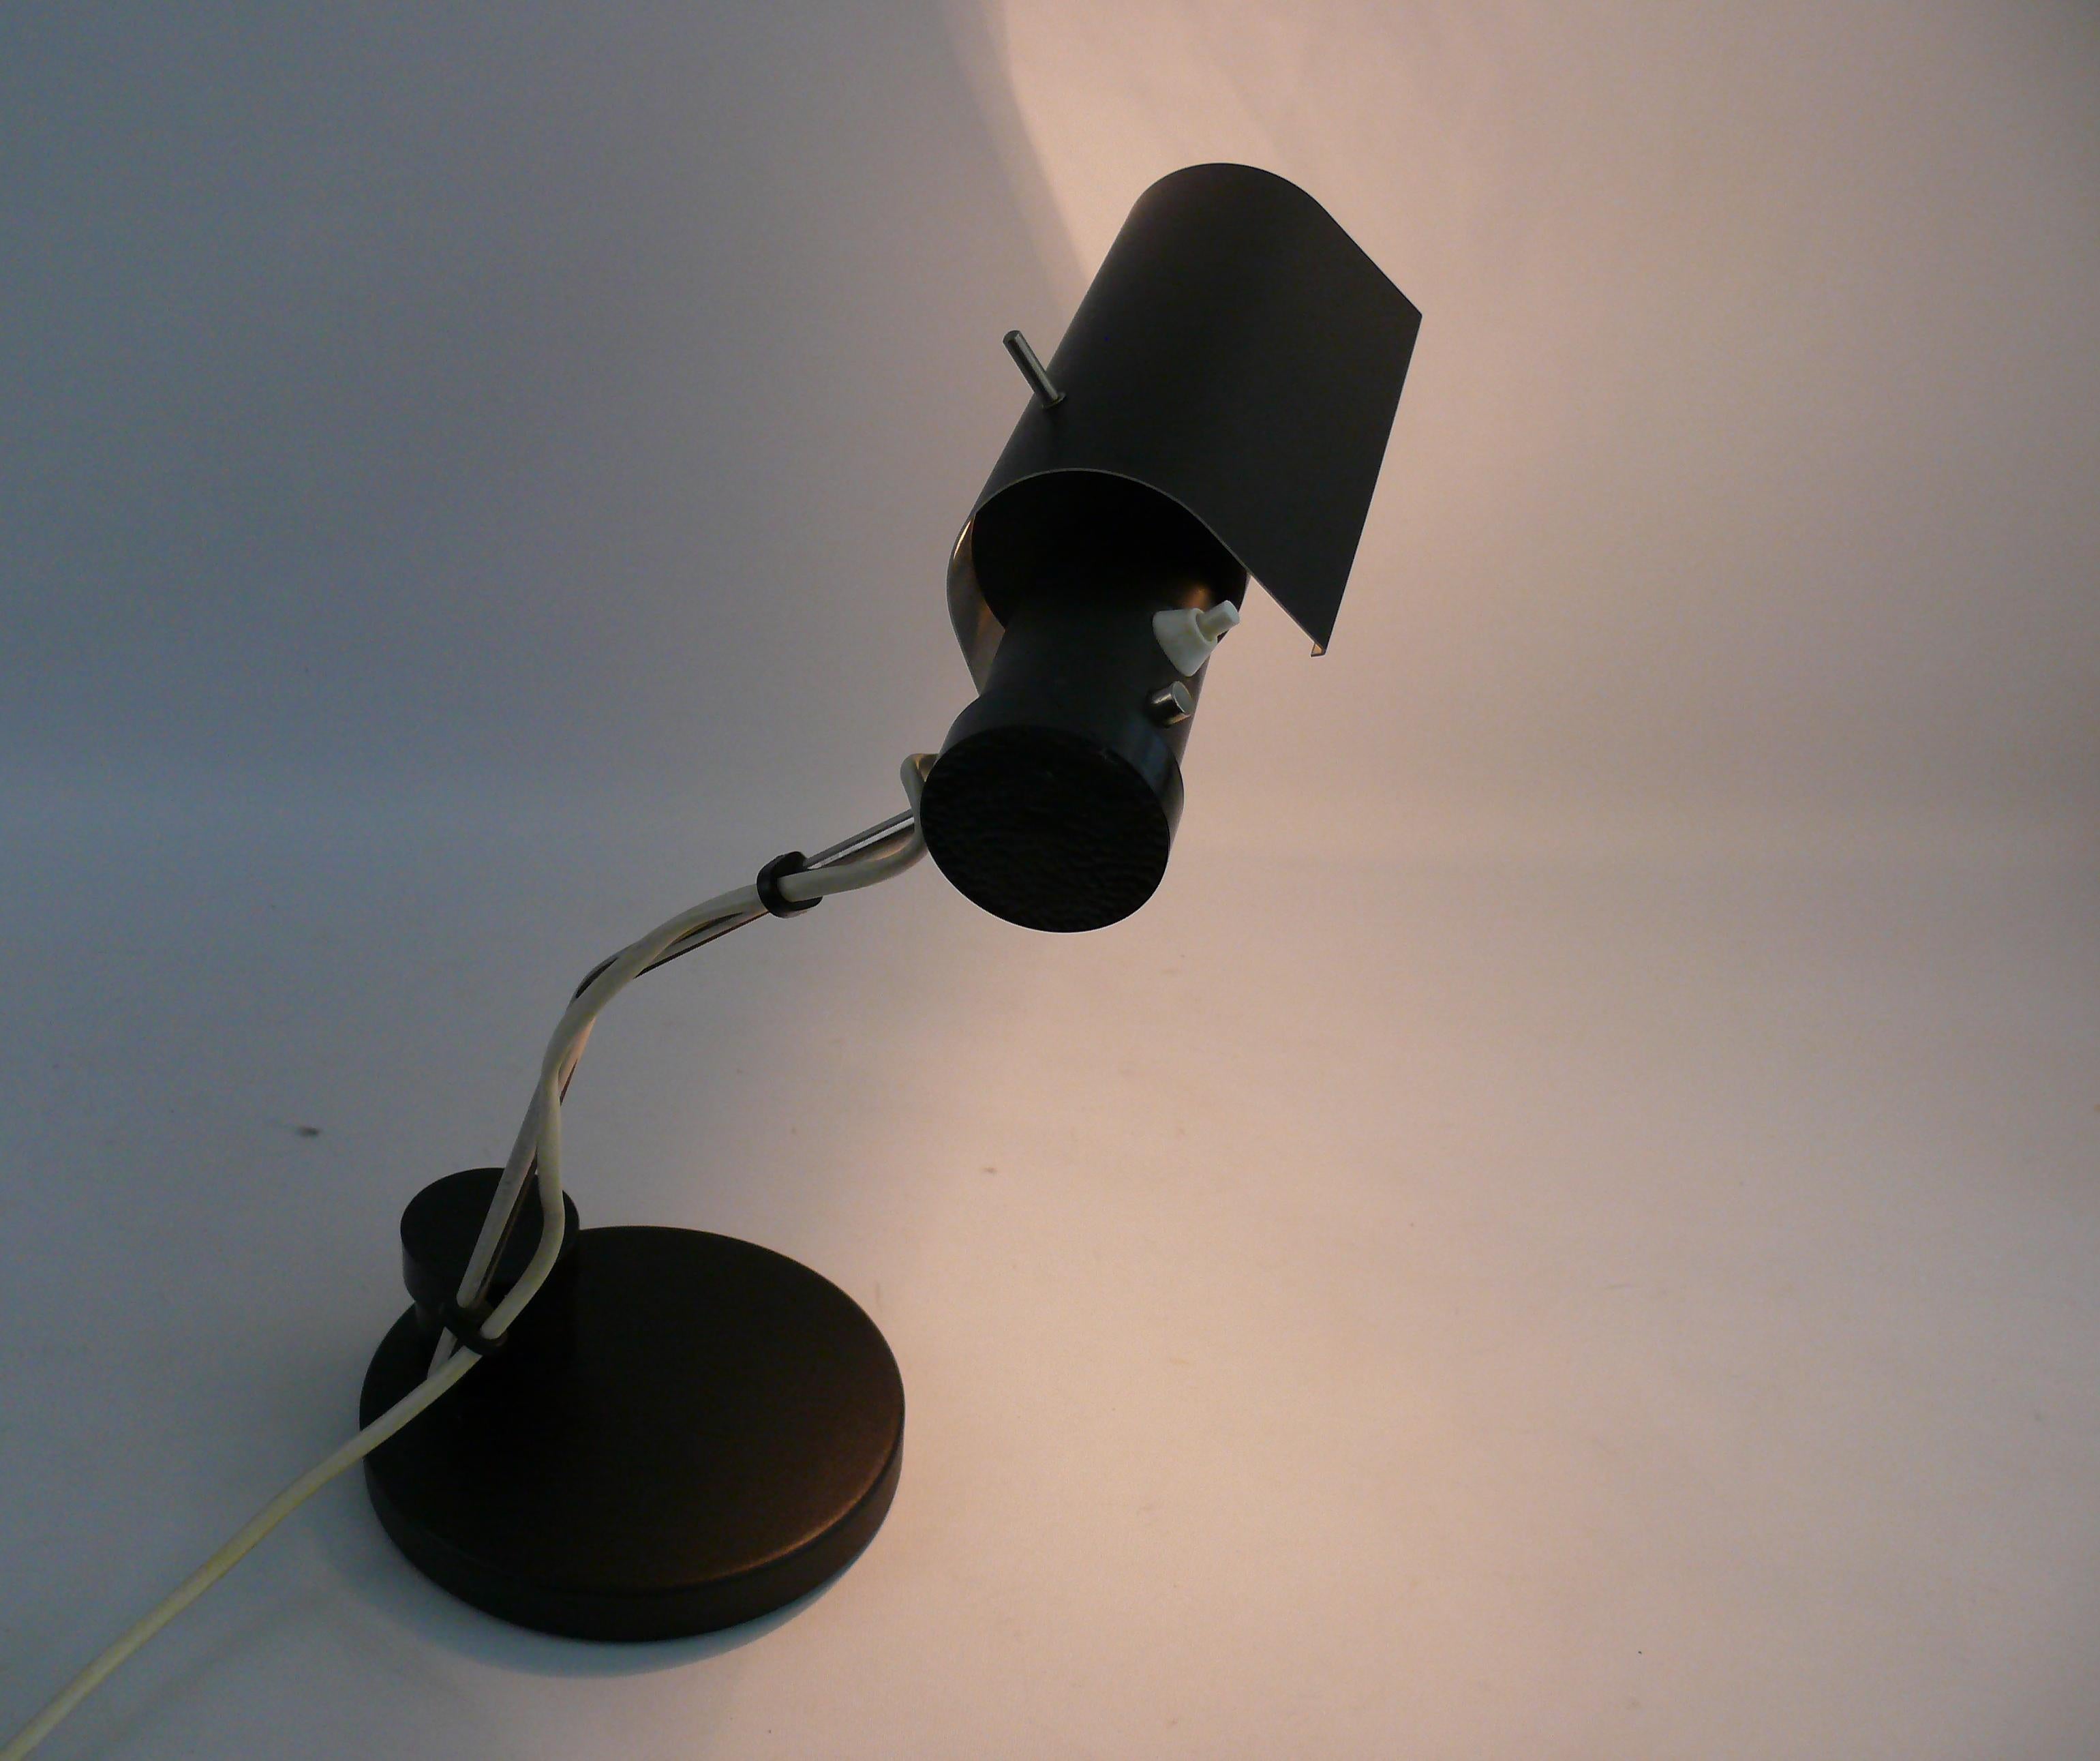 Desk lamp from the 1960s by the company Metallrücker Halle, type TK 501 - design Oskar Immerschied. The lamp is made of black painted metal and chrome-plated elements as well as plastic handle screws. The desk lamp is very solidly made. The heavy